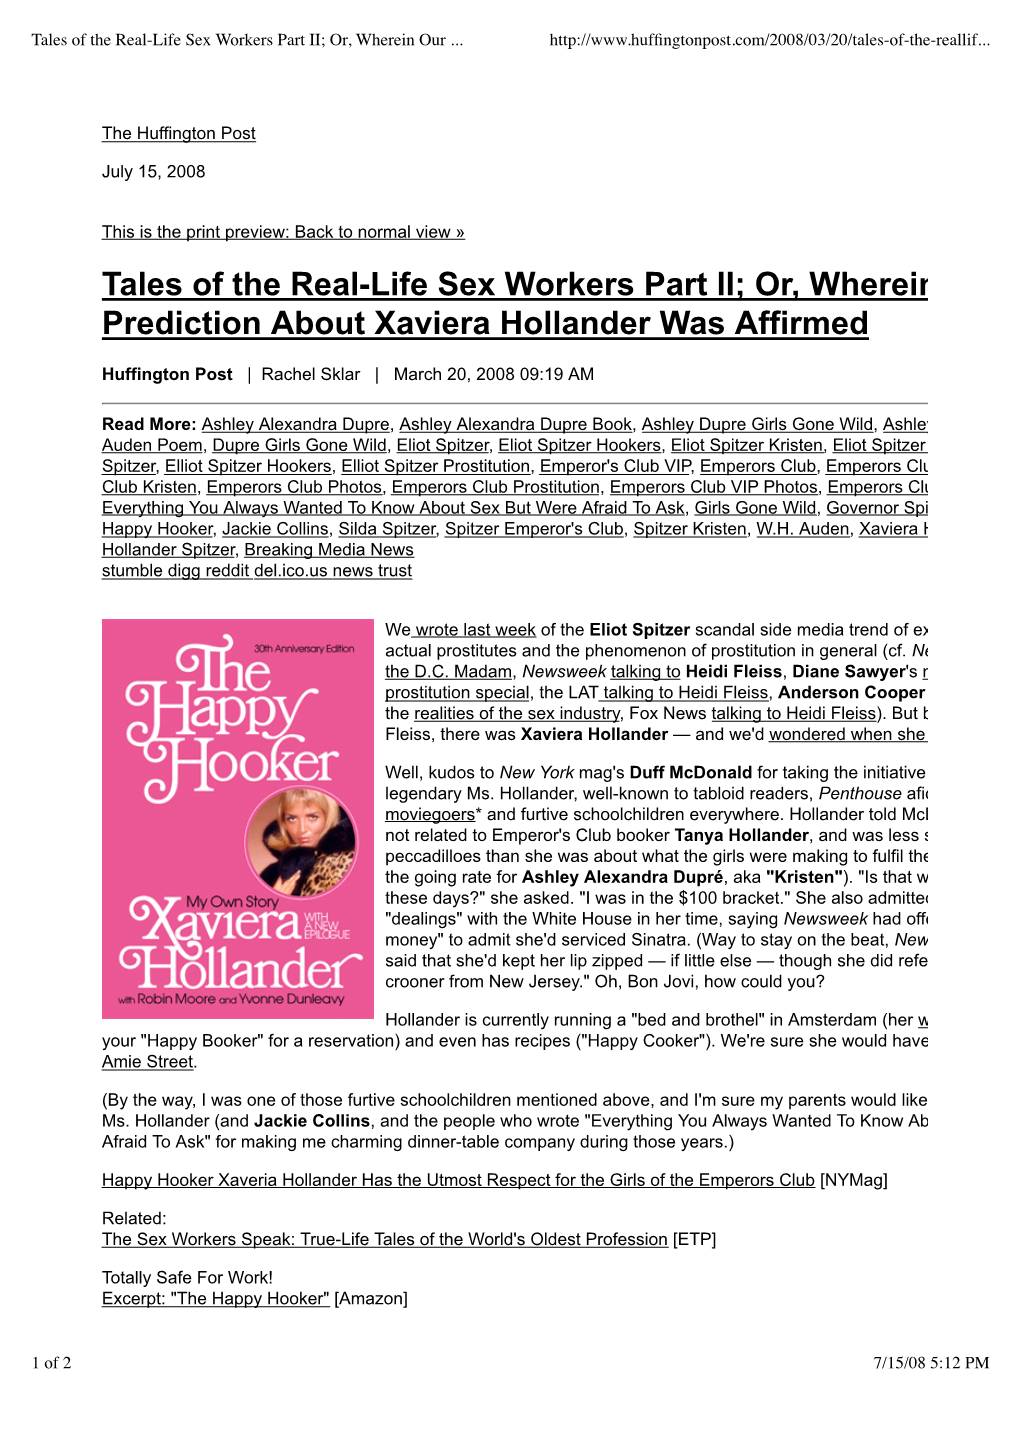 Tales of the Real-Life Sex Workers Part II; Or, Wherein Our Prediction About Xaviera Hollander Was Affirmed